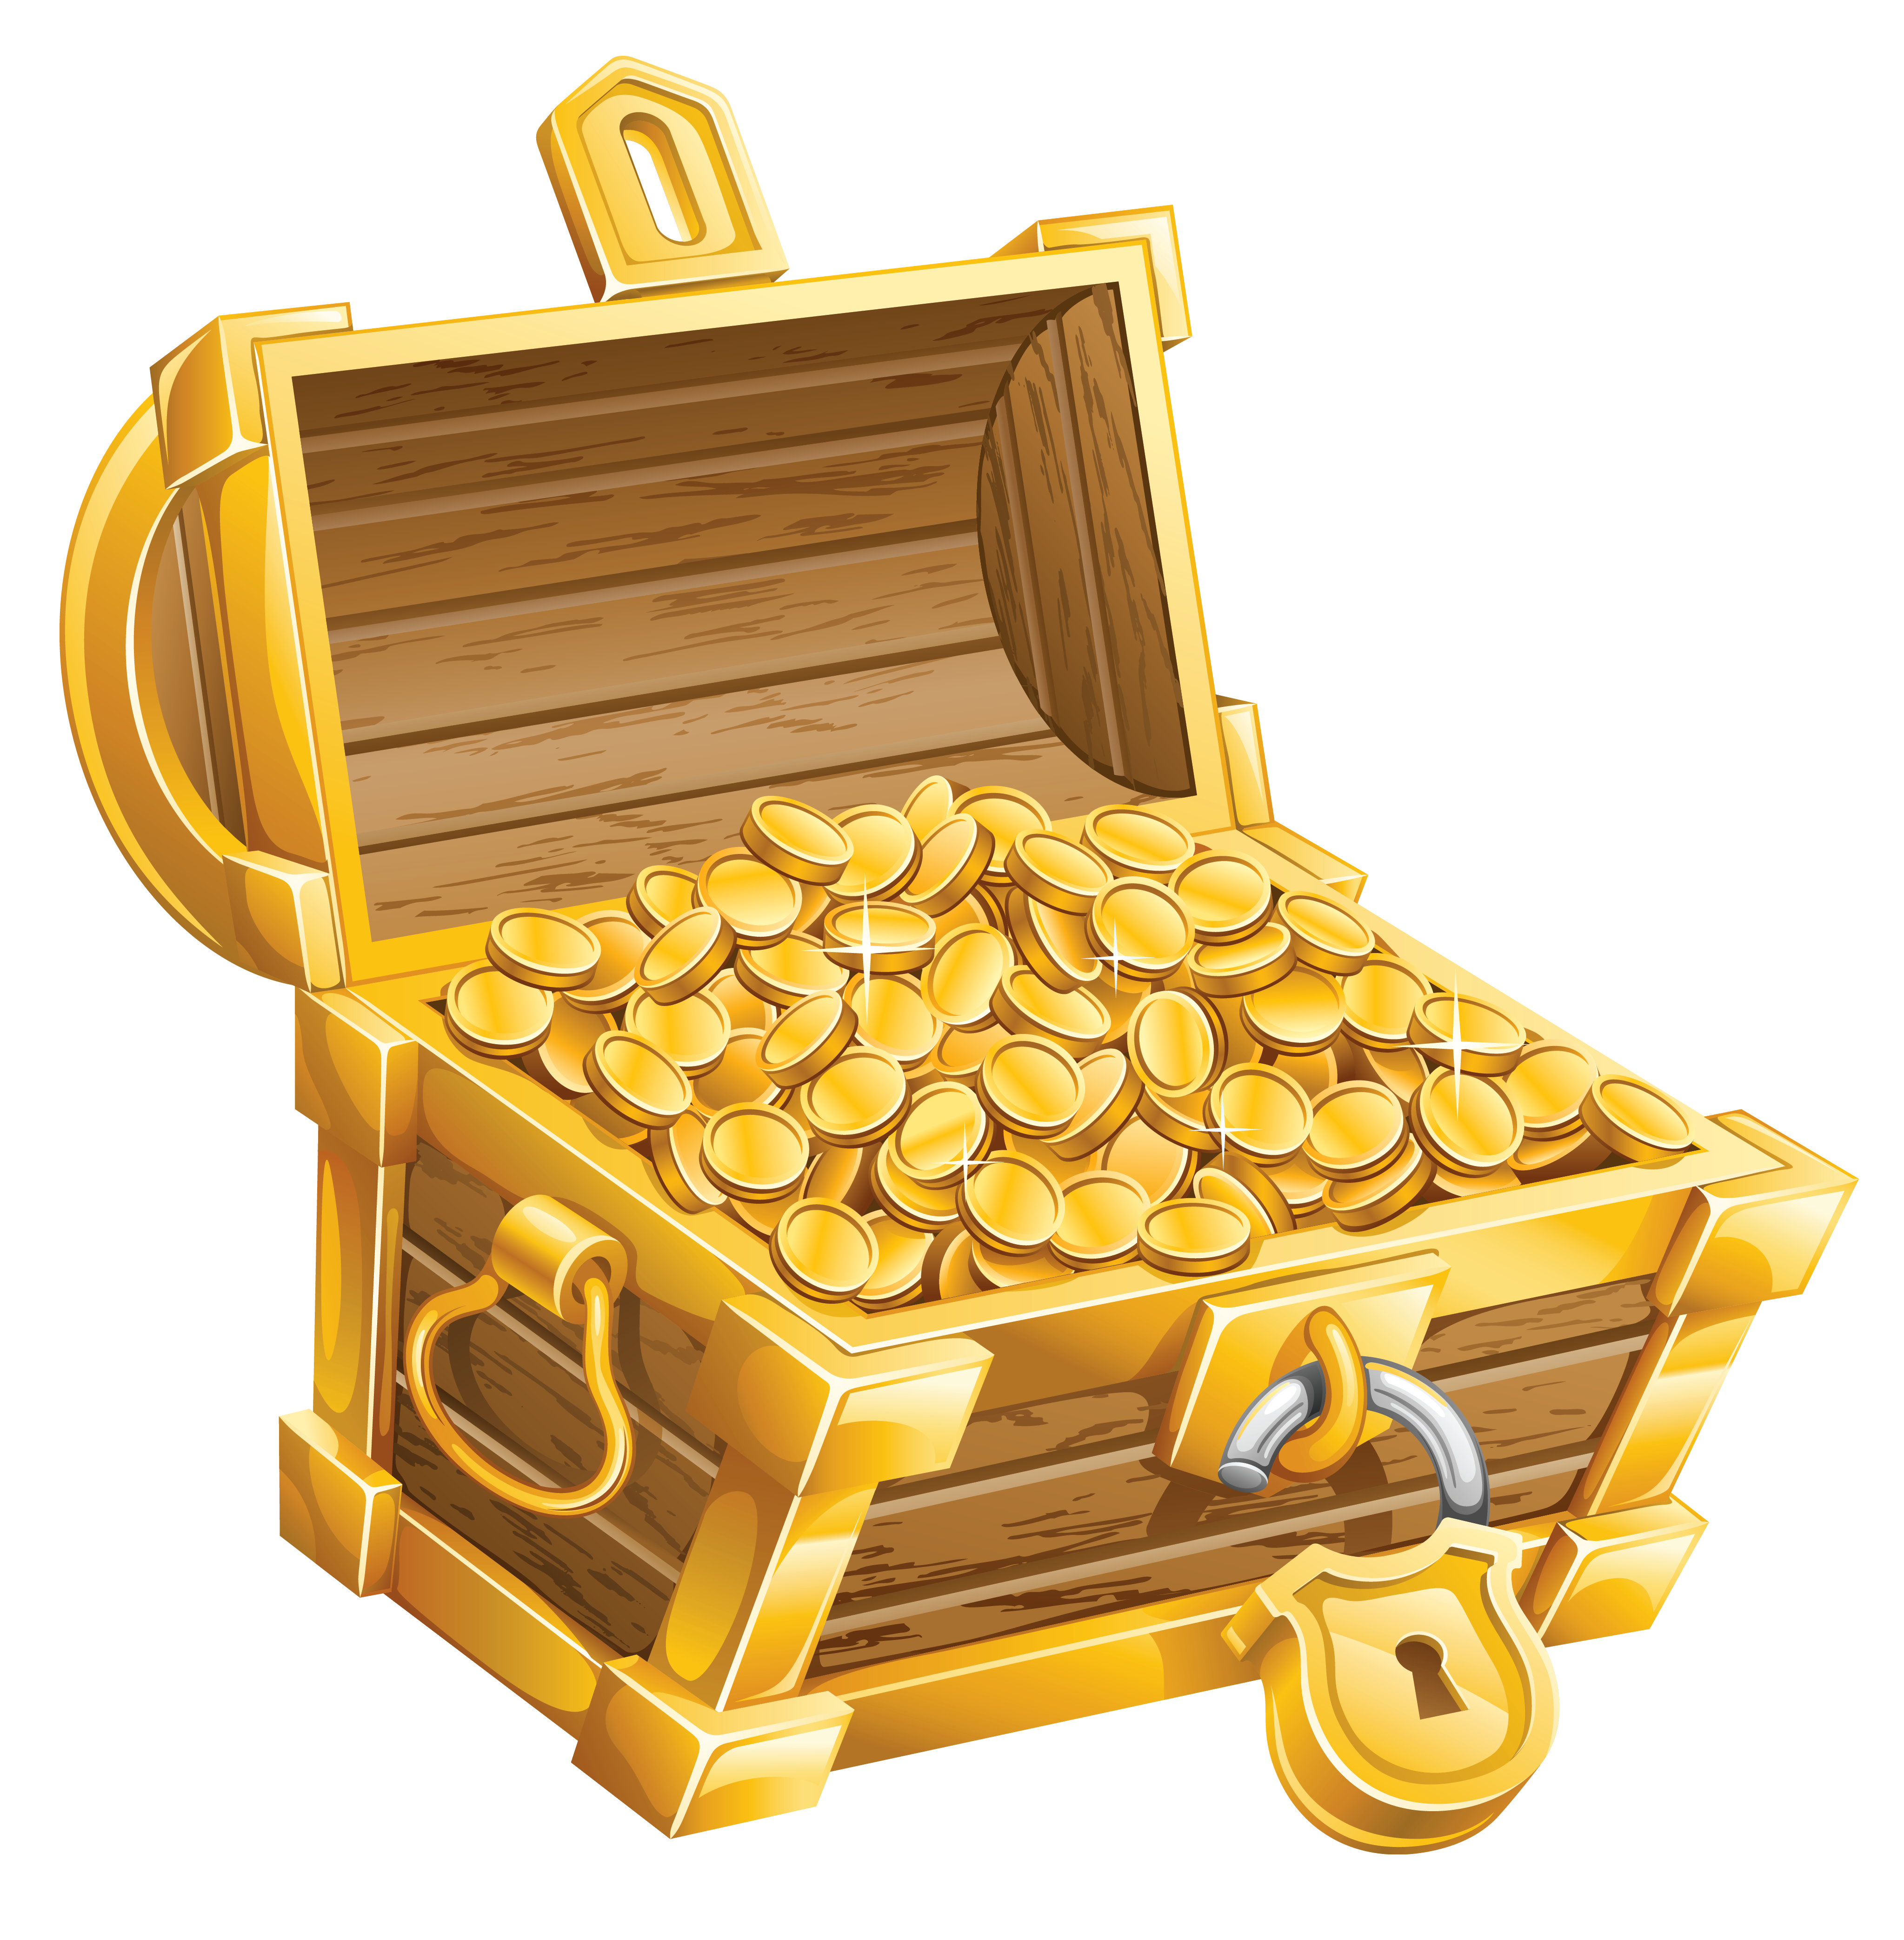 Treasure Chest PNG Clipart Picture